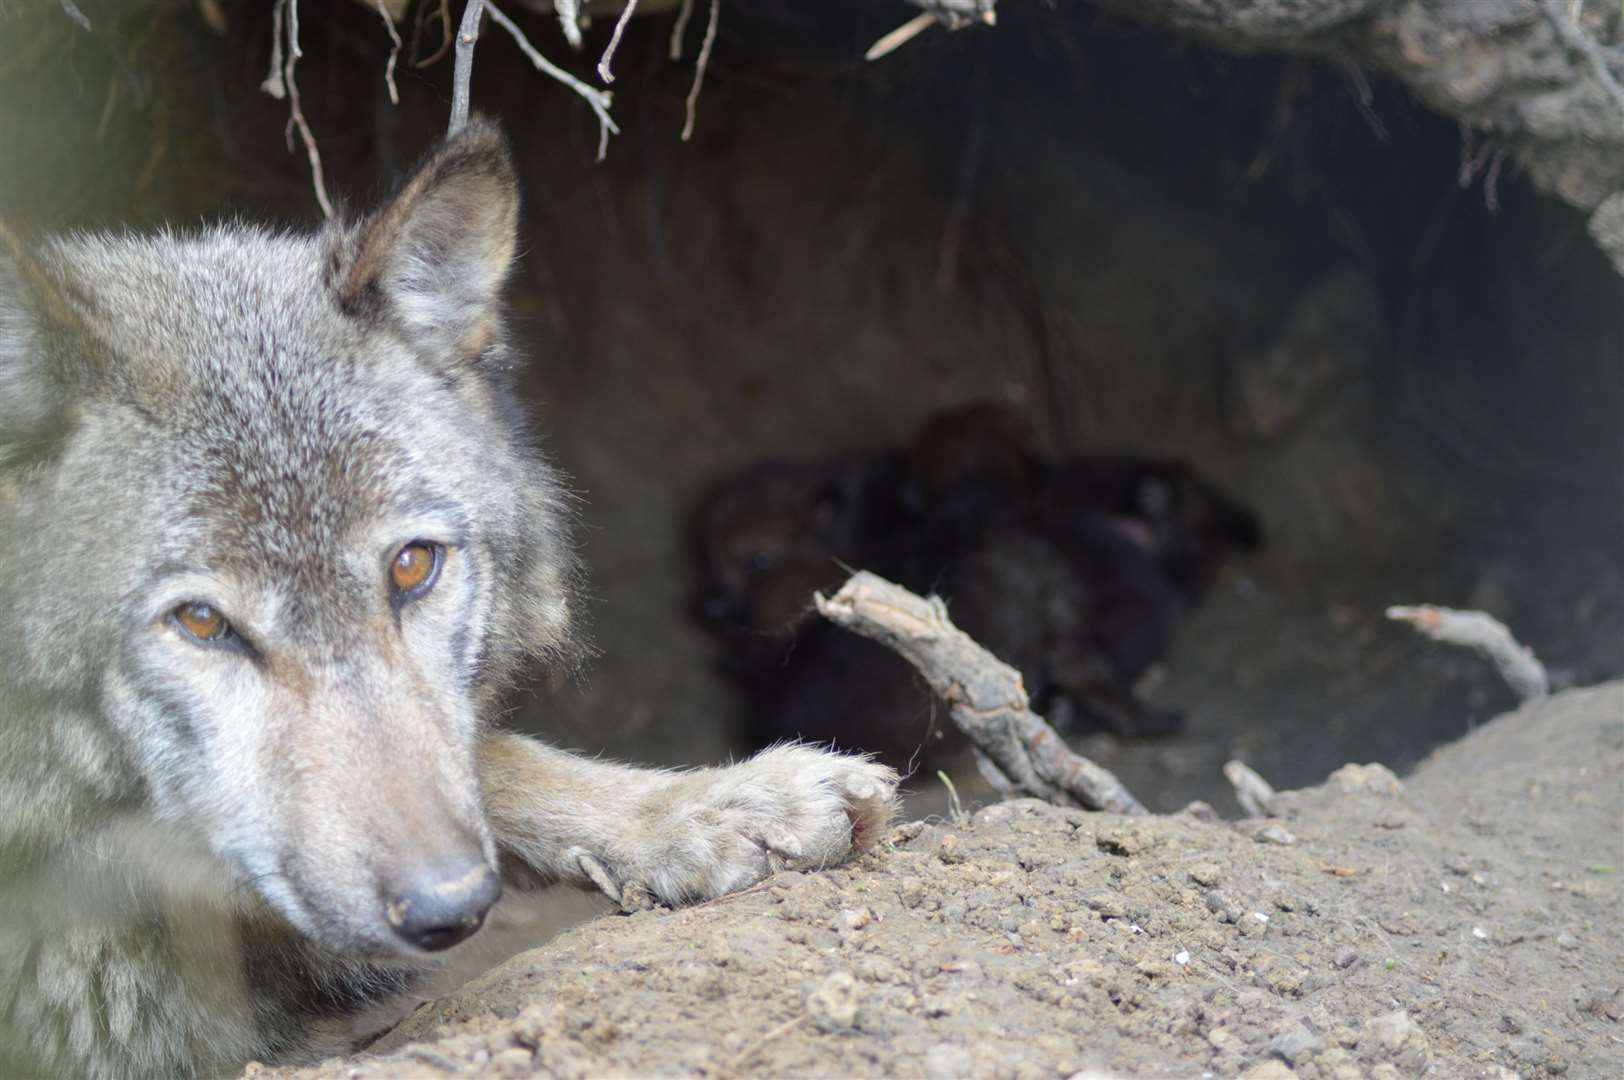 Wingham welcomed its first ever European wolf pups in 2017